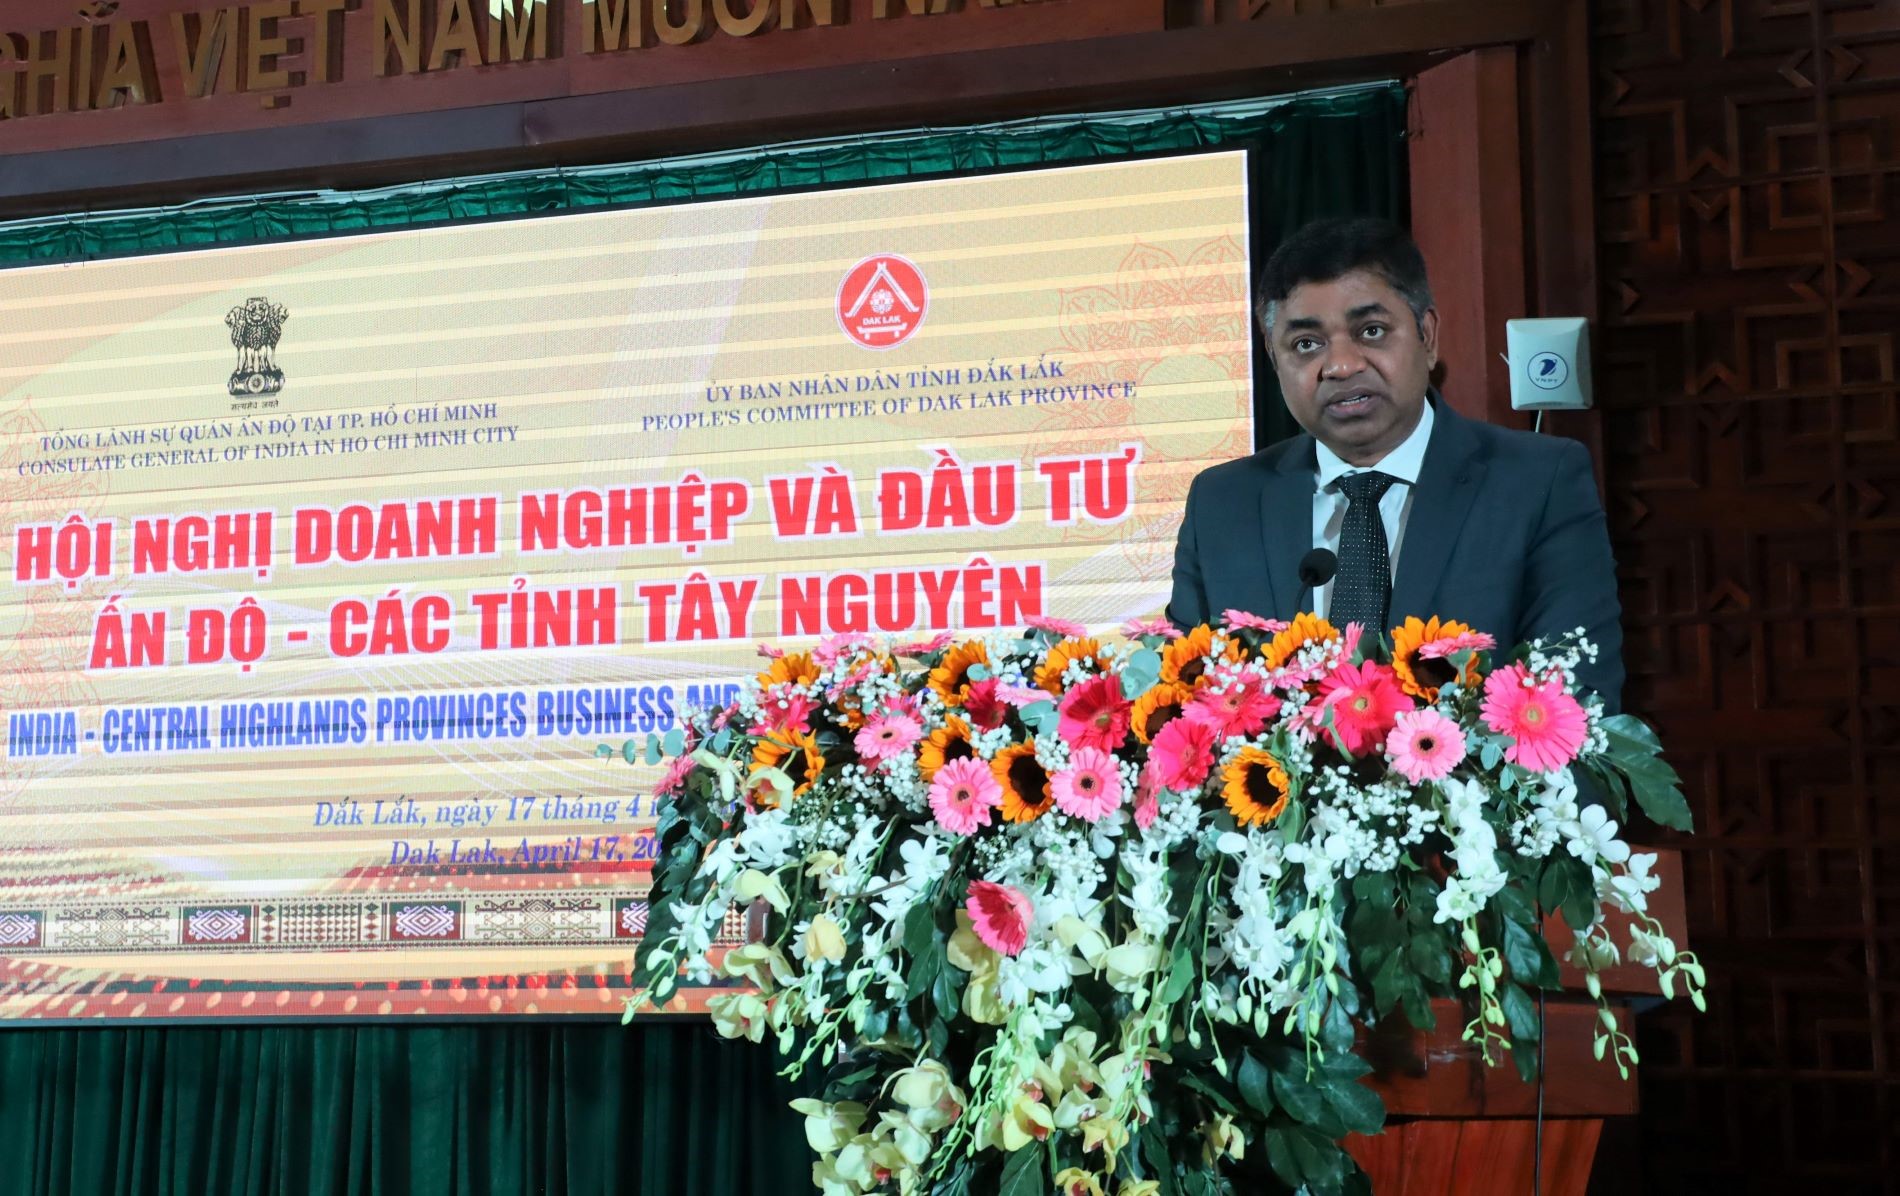 Conference on Business and Investment between India and the Central Highlands Provinces 